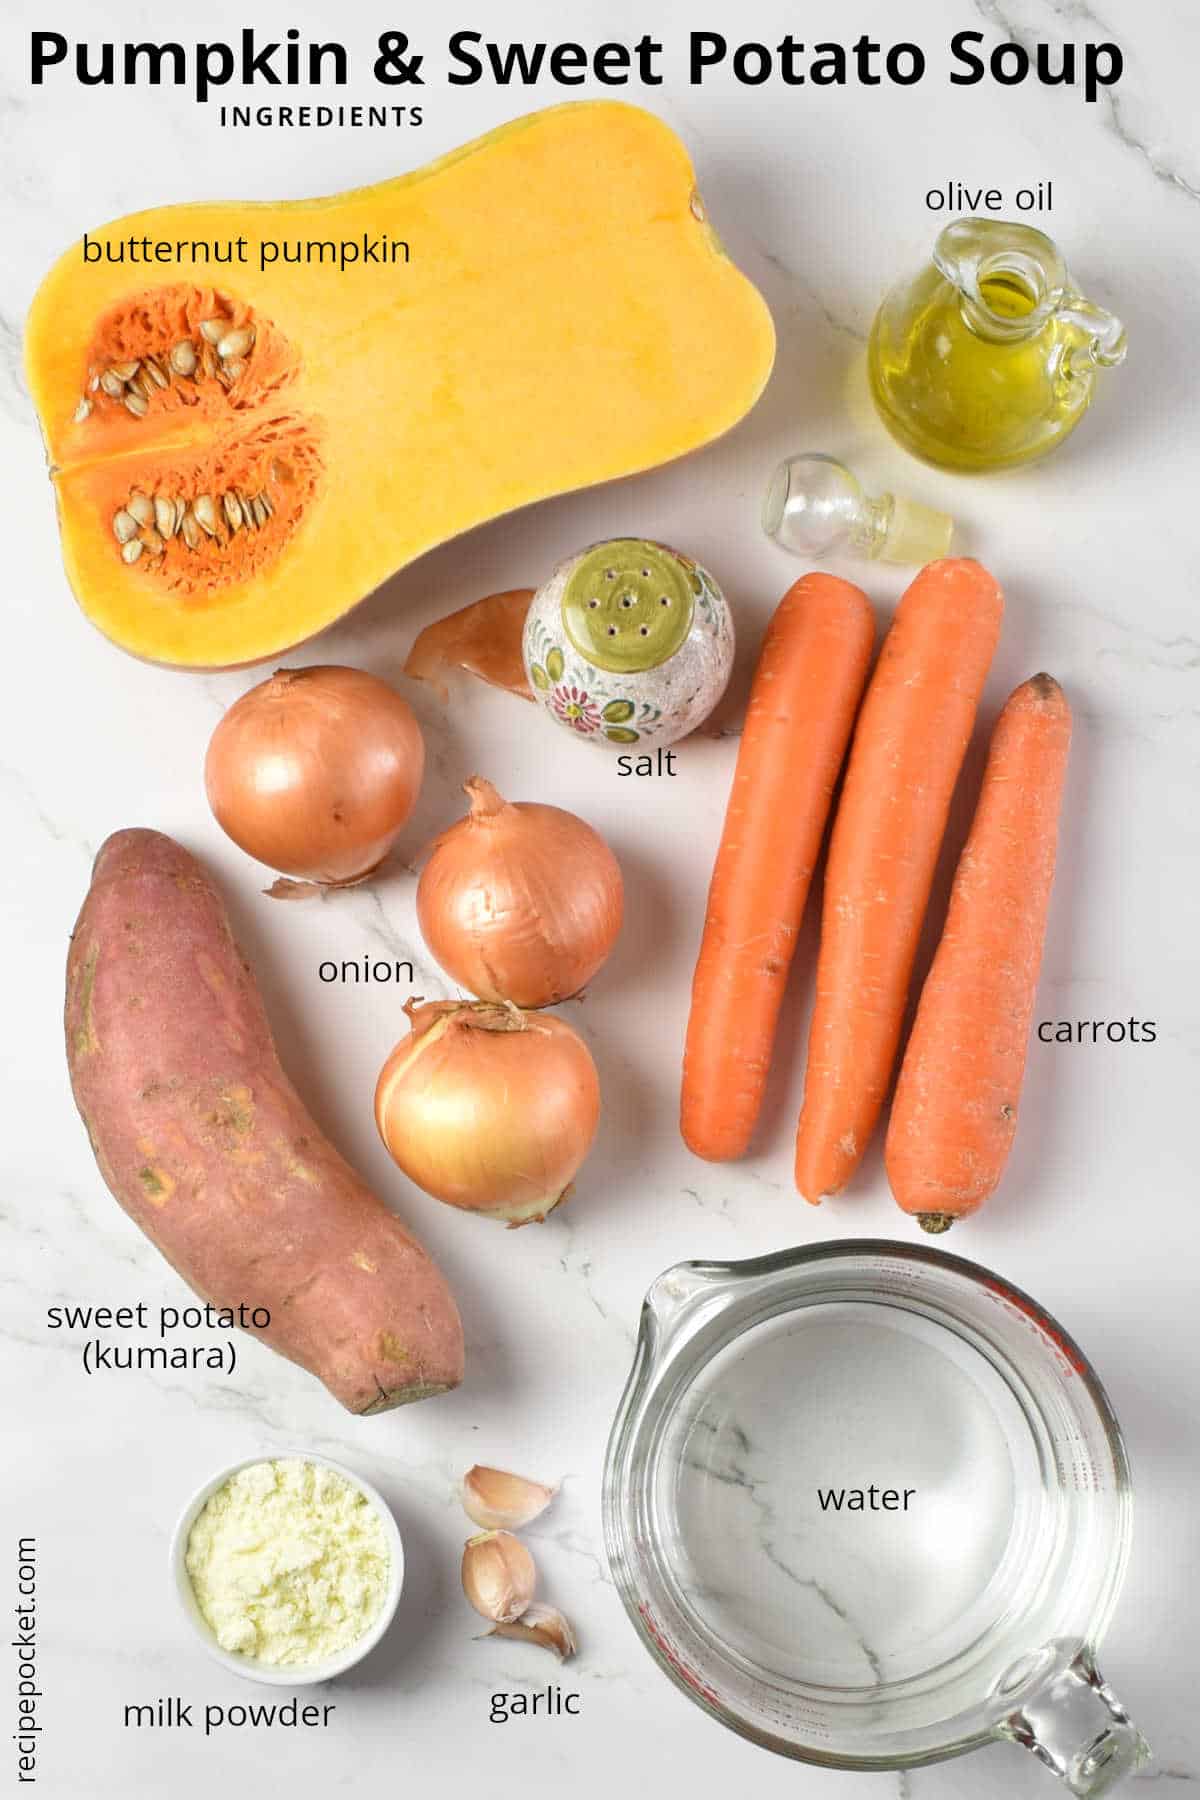 Picture showing butternut pumpkin, carrots, onions and sweet potatoes.